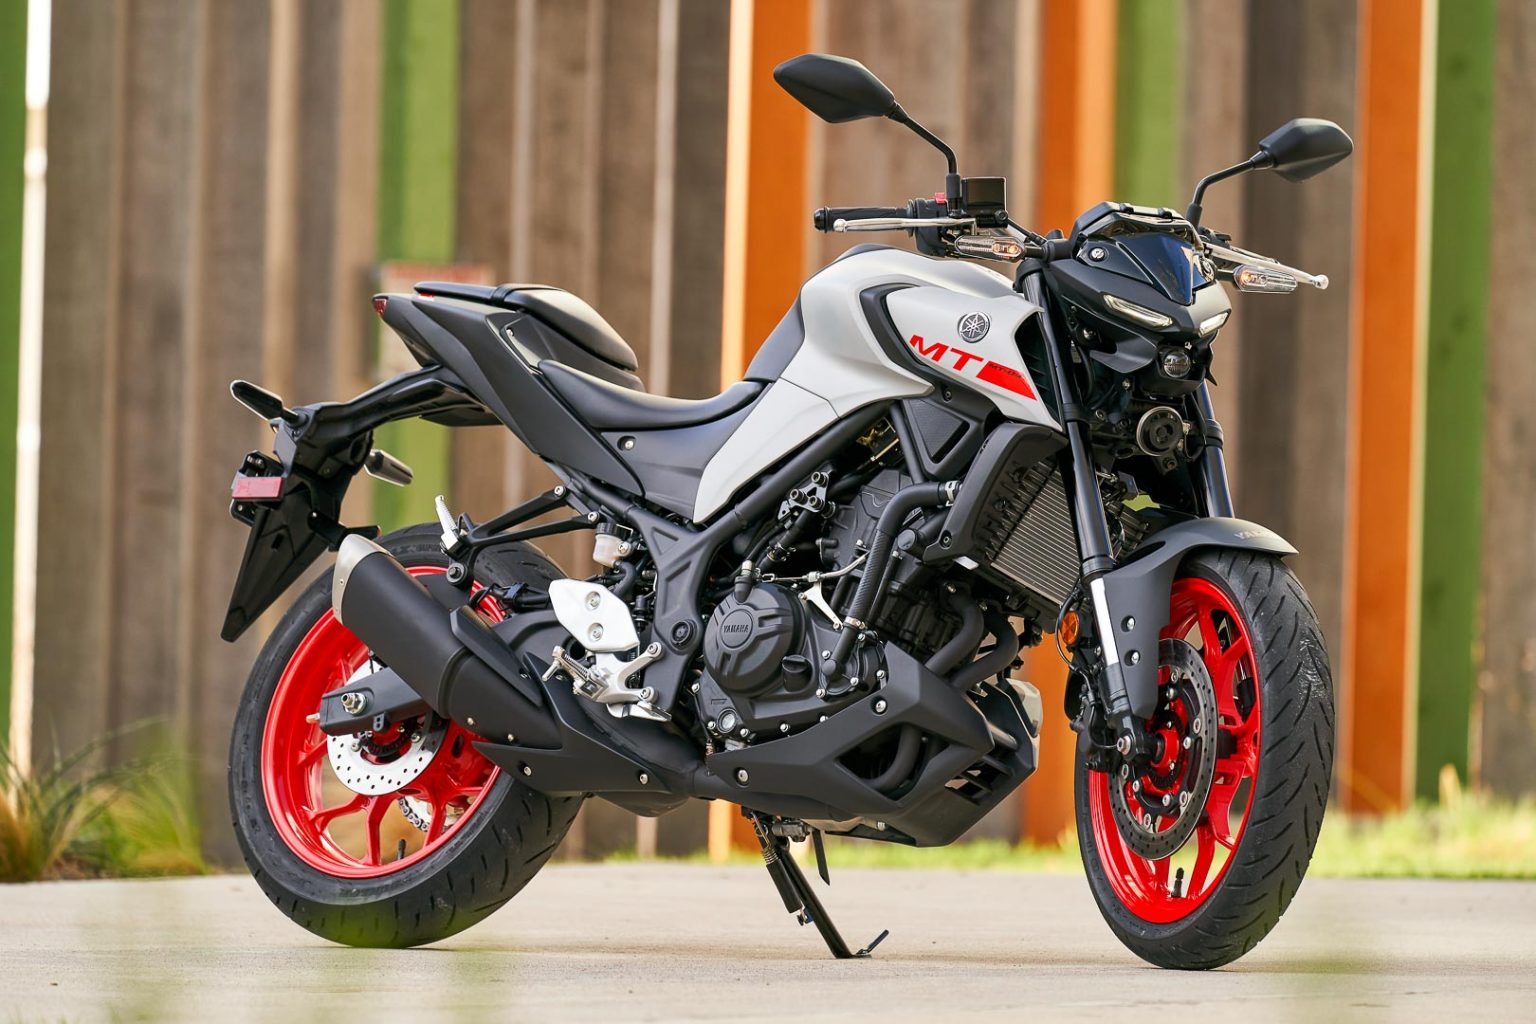 2020 YAMAHA MT-03 REVIEW (13 FAST FACTS) - GearOpen.com